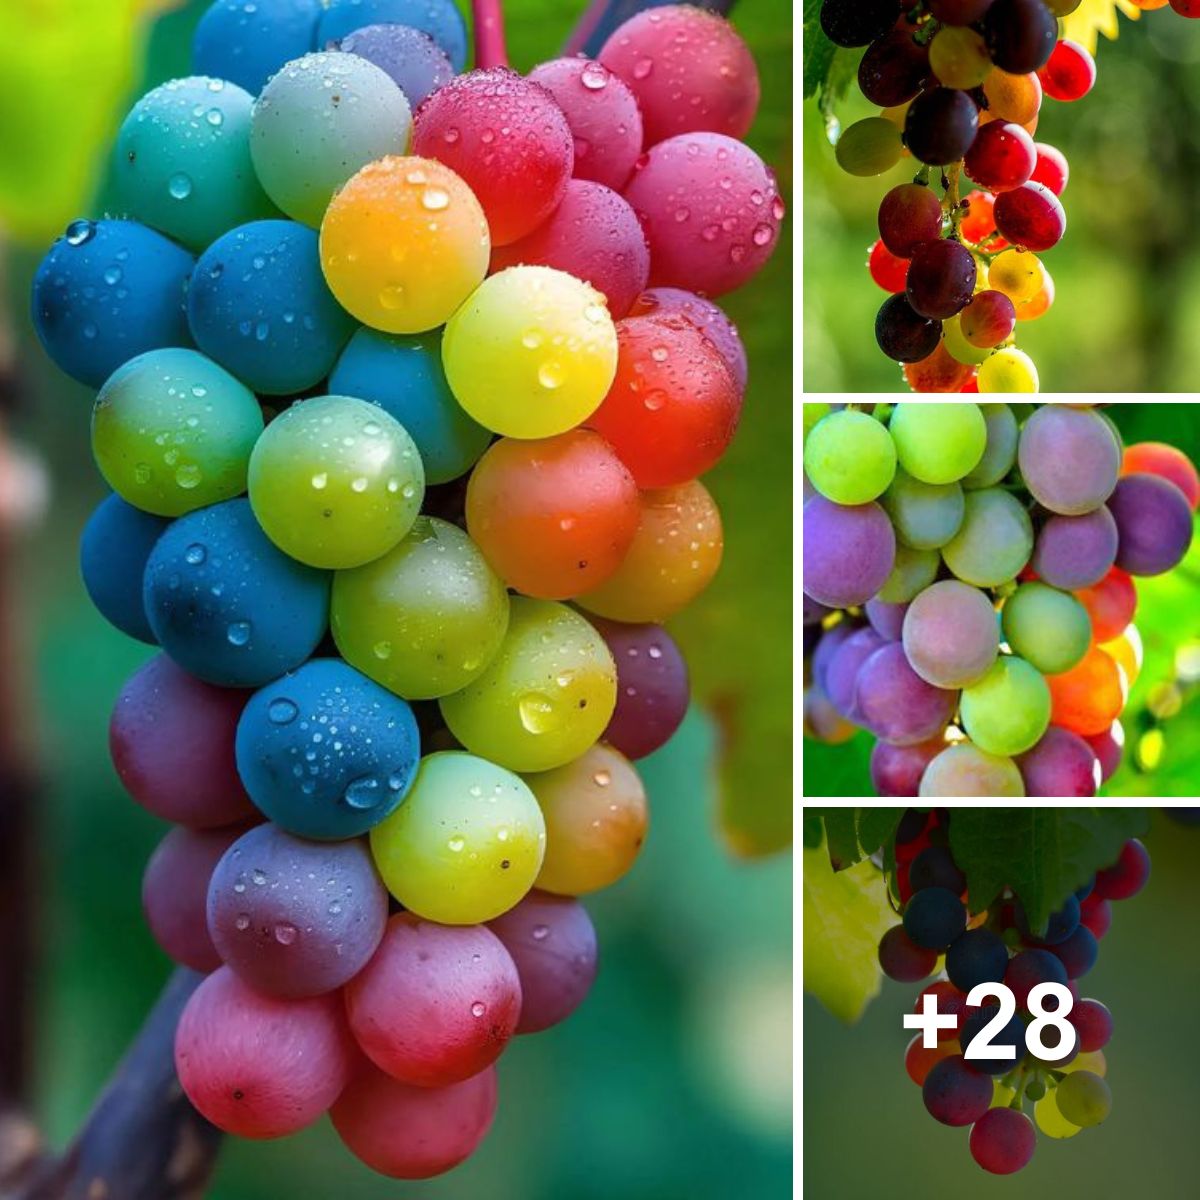 Clusters of grapes in seven vibrant colors: A magnificent visual symphony of the rainbow.